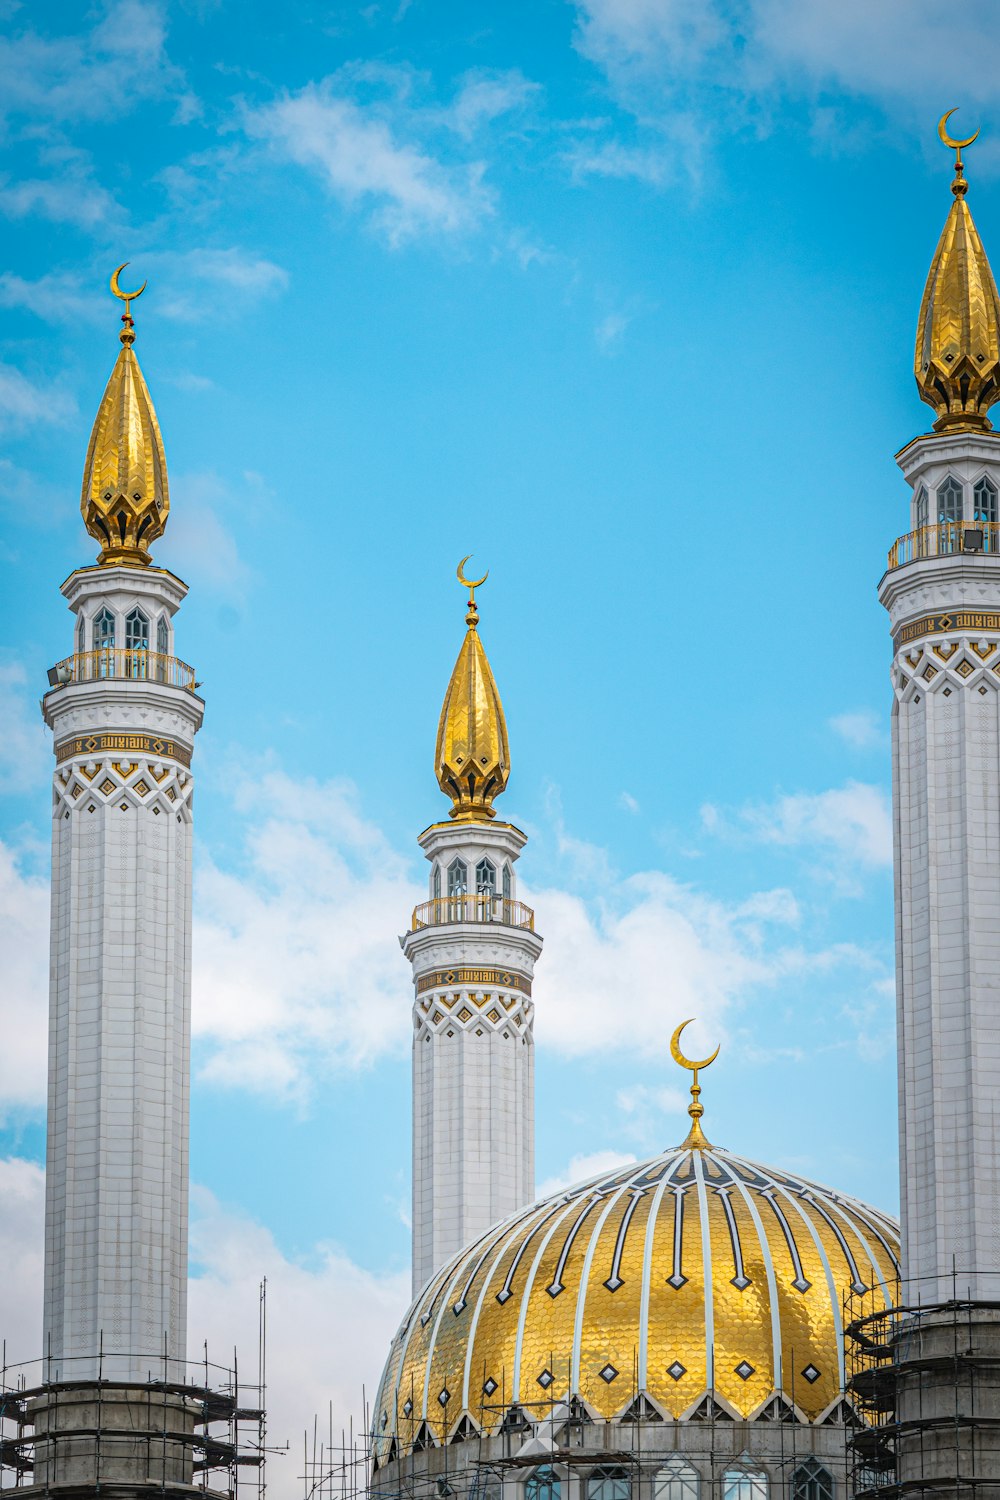 a group of tall buildings with gold domes and towers